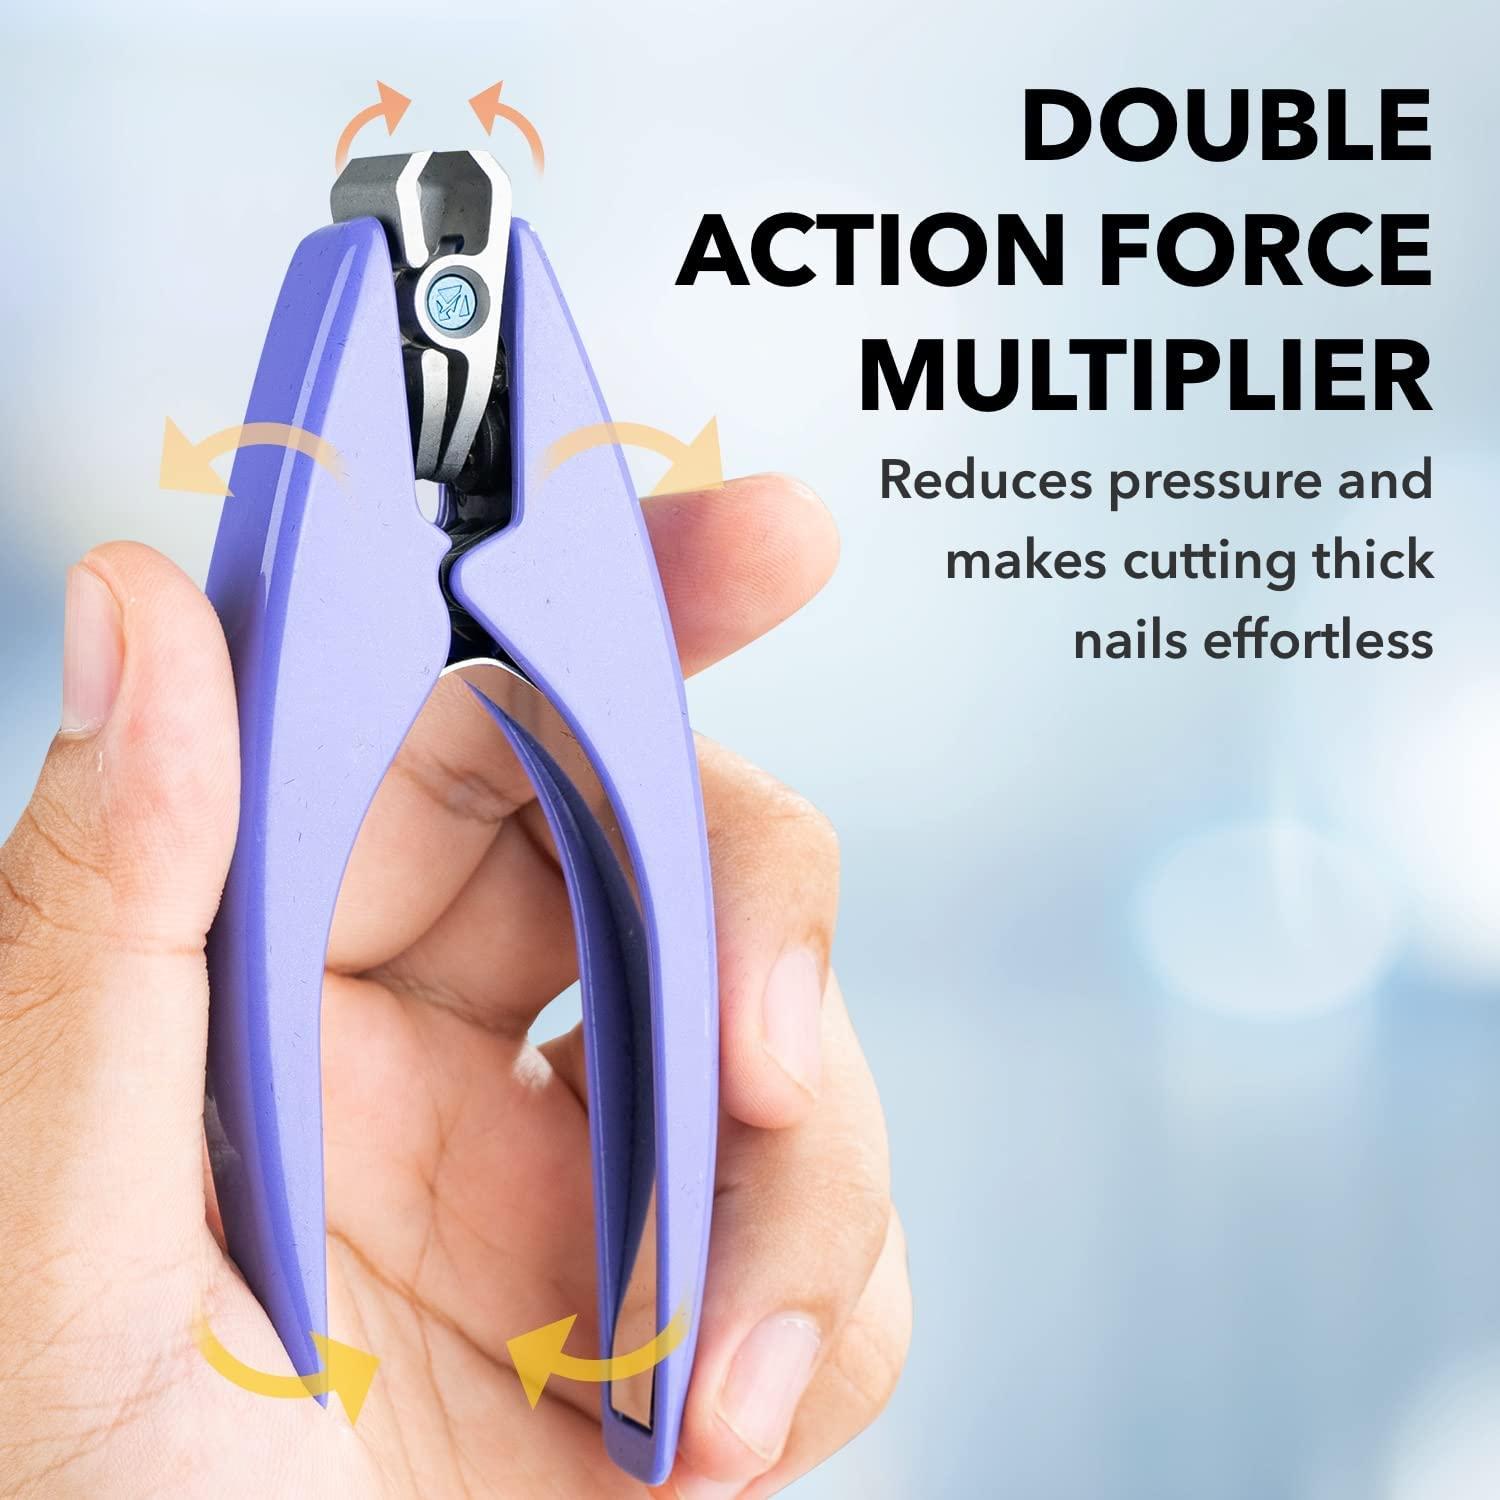 Double-Action Nail Clippers